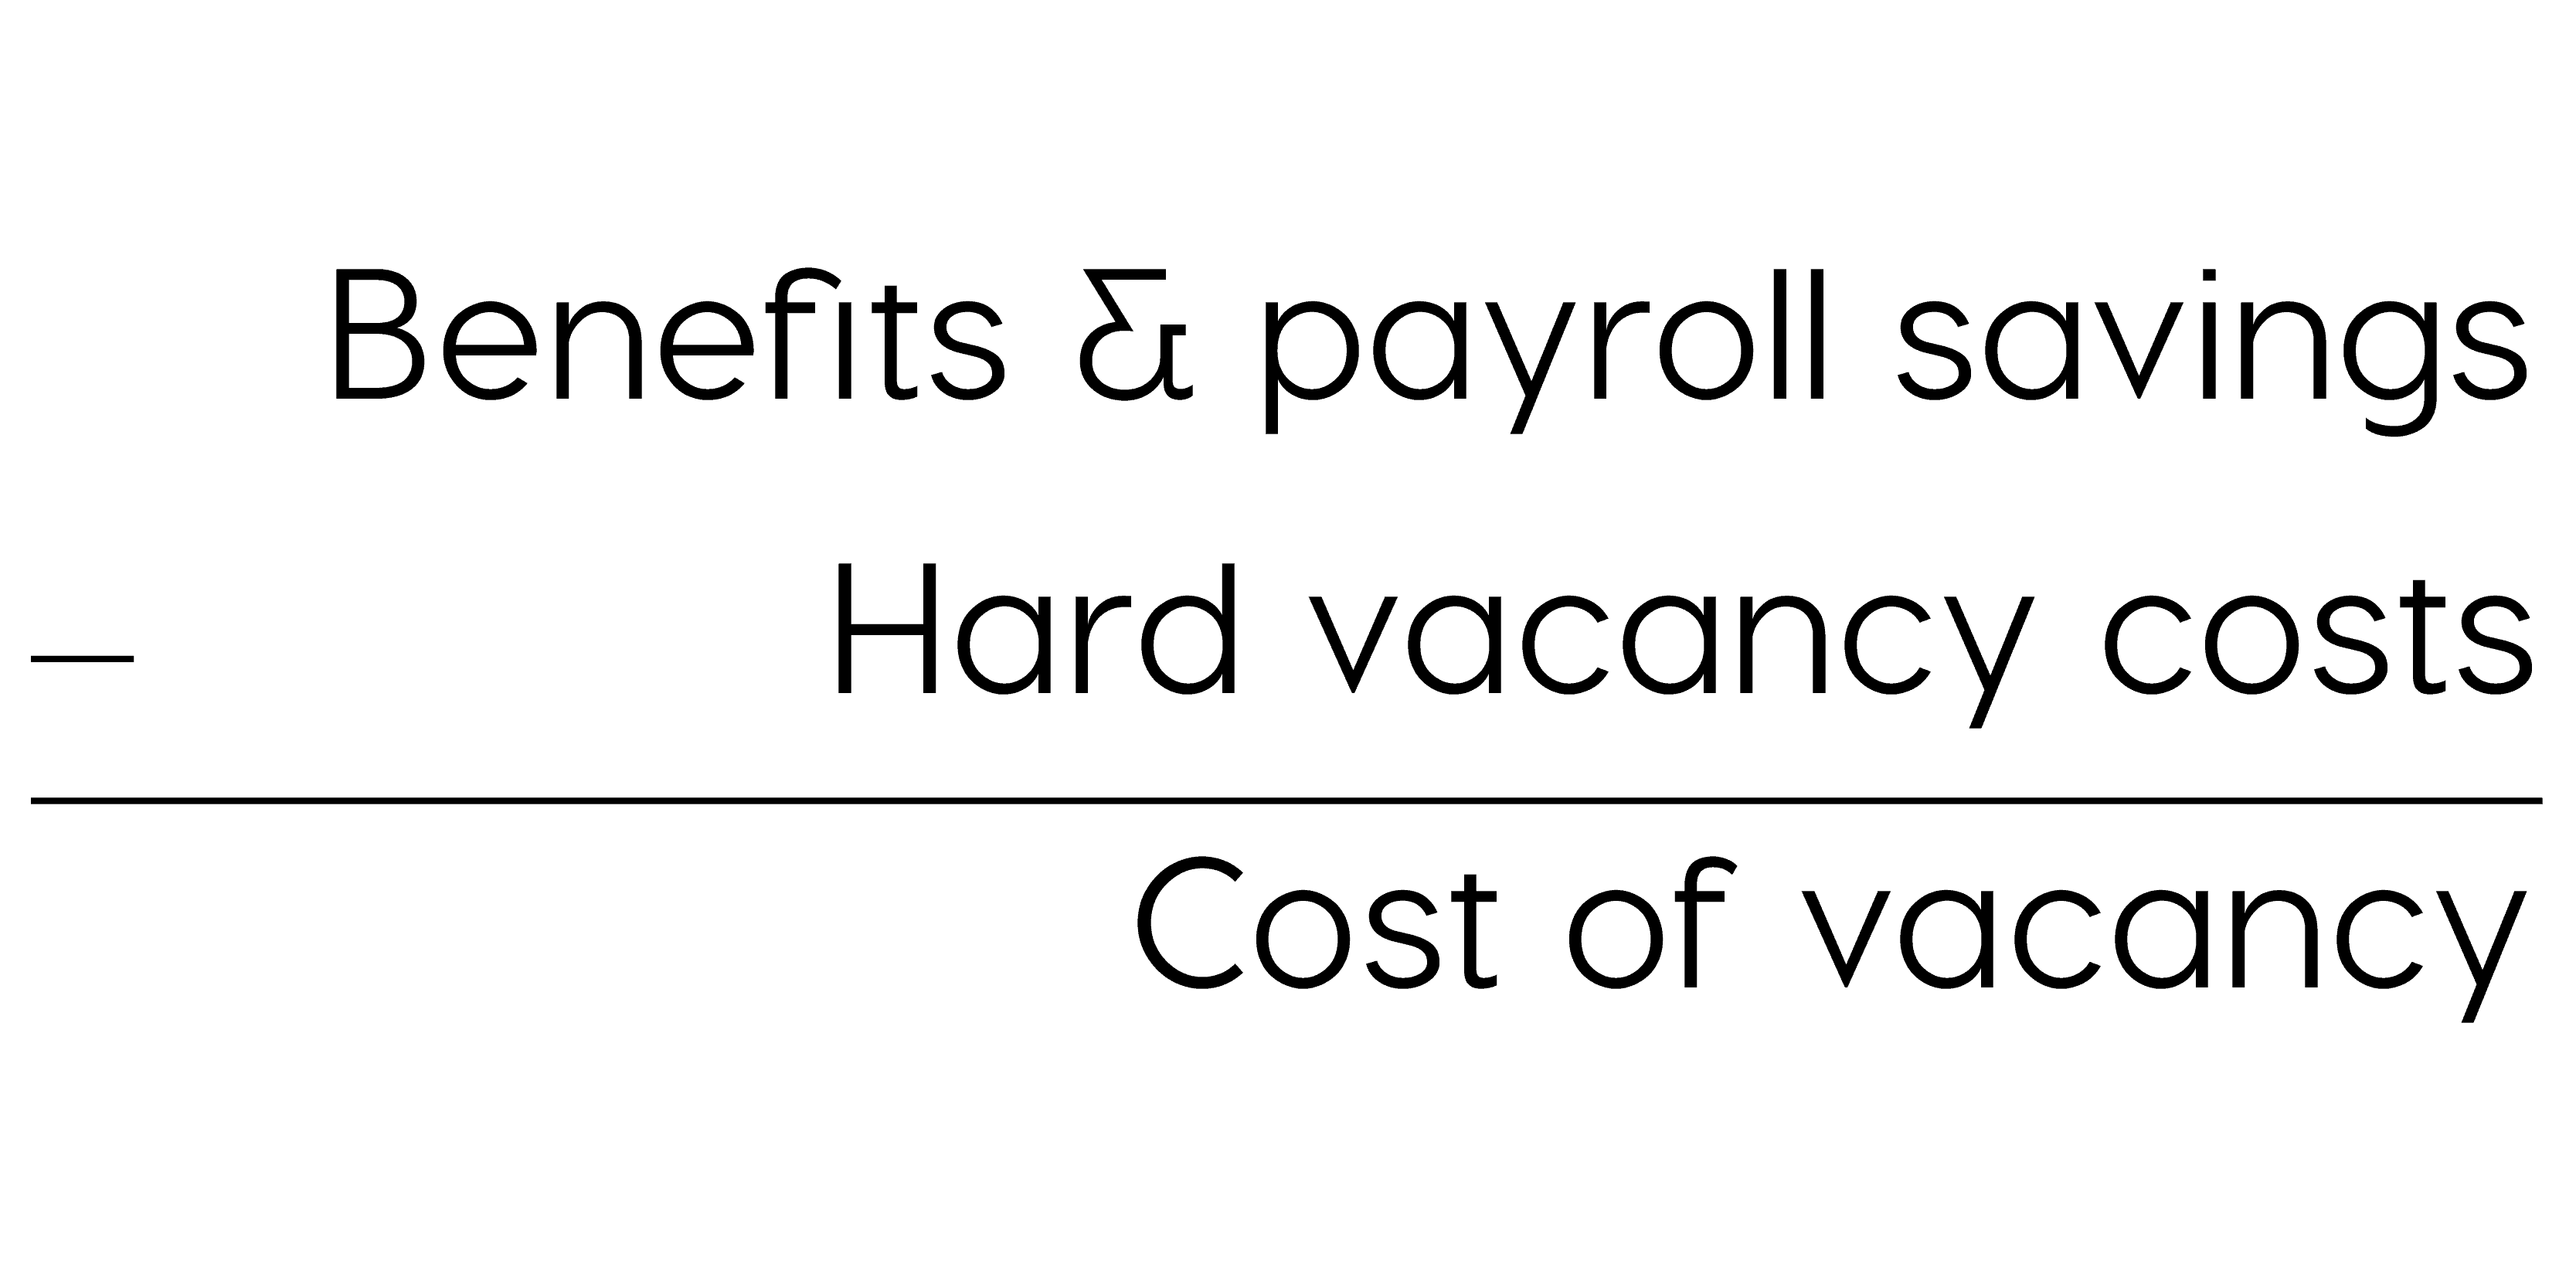 Benefits and payroll savings minus hard vacancy costs equals cost of vacancy.